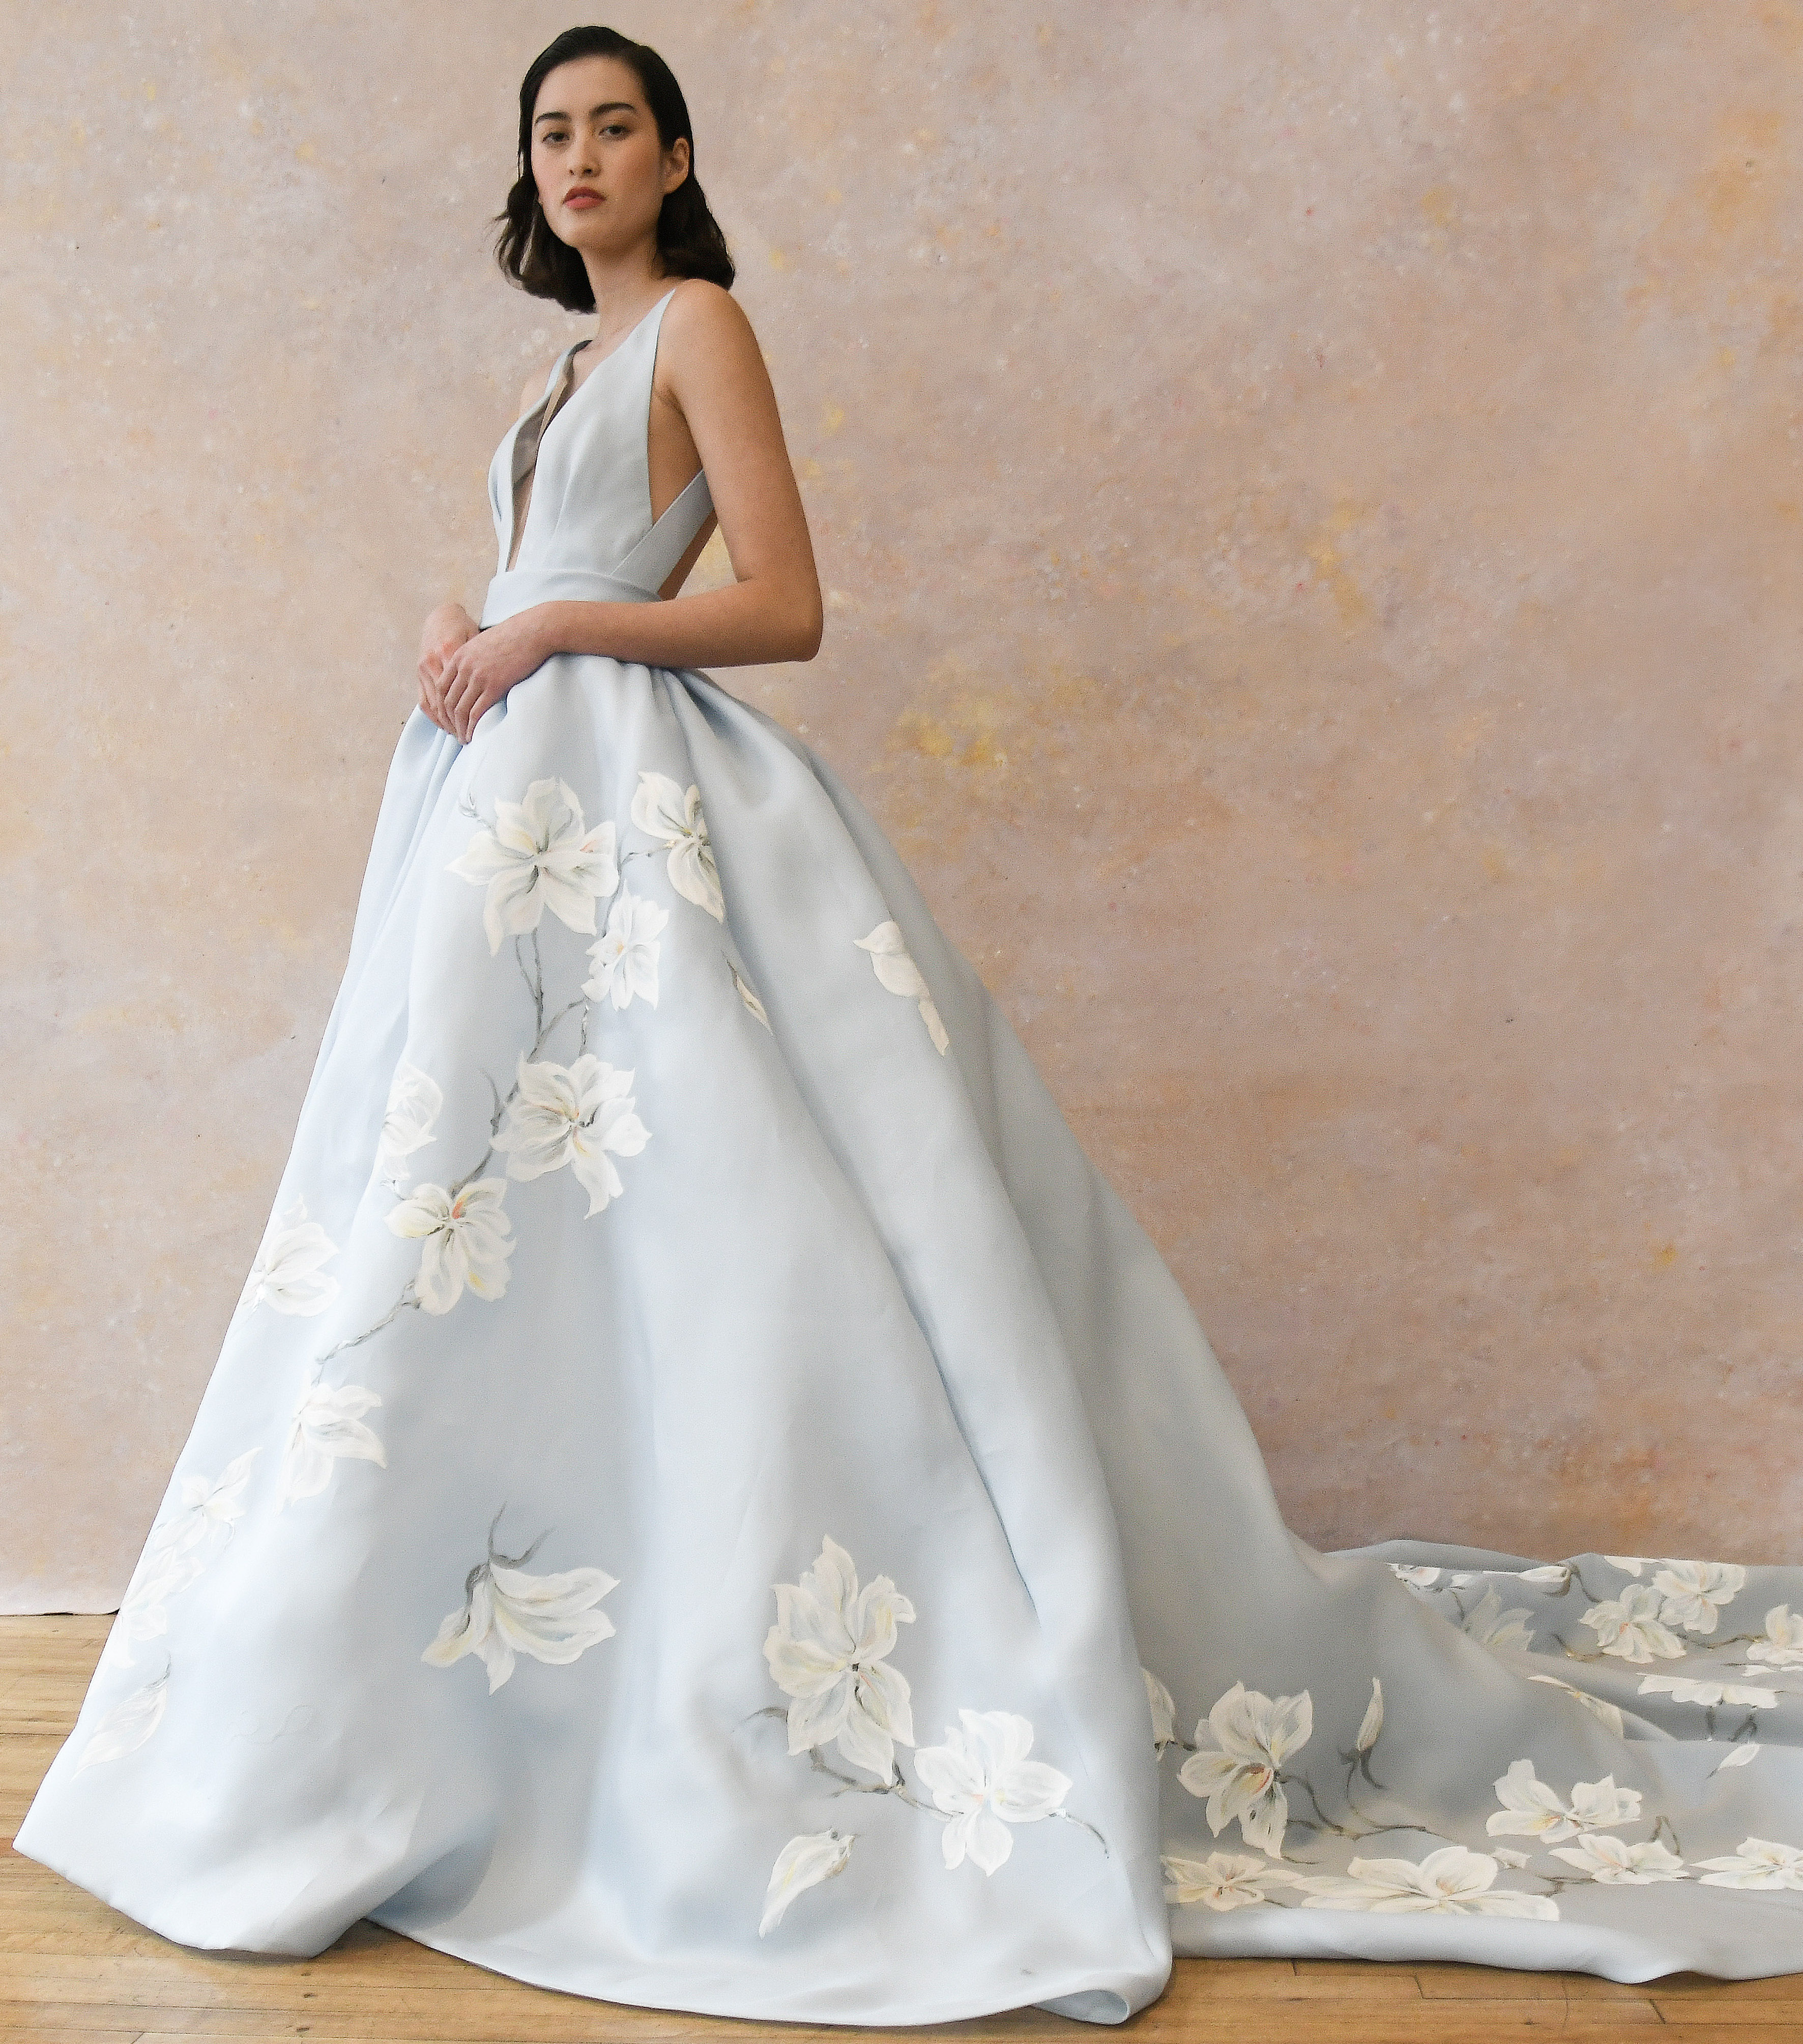  designed by Ines Di Santo. A baby blue wedding gown with white flowers trailing down the skirt.